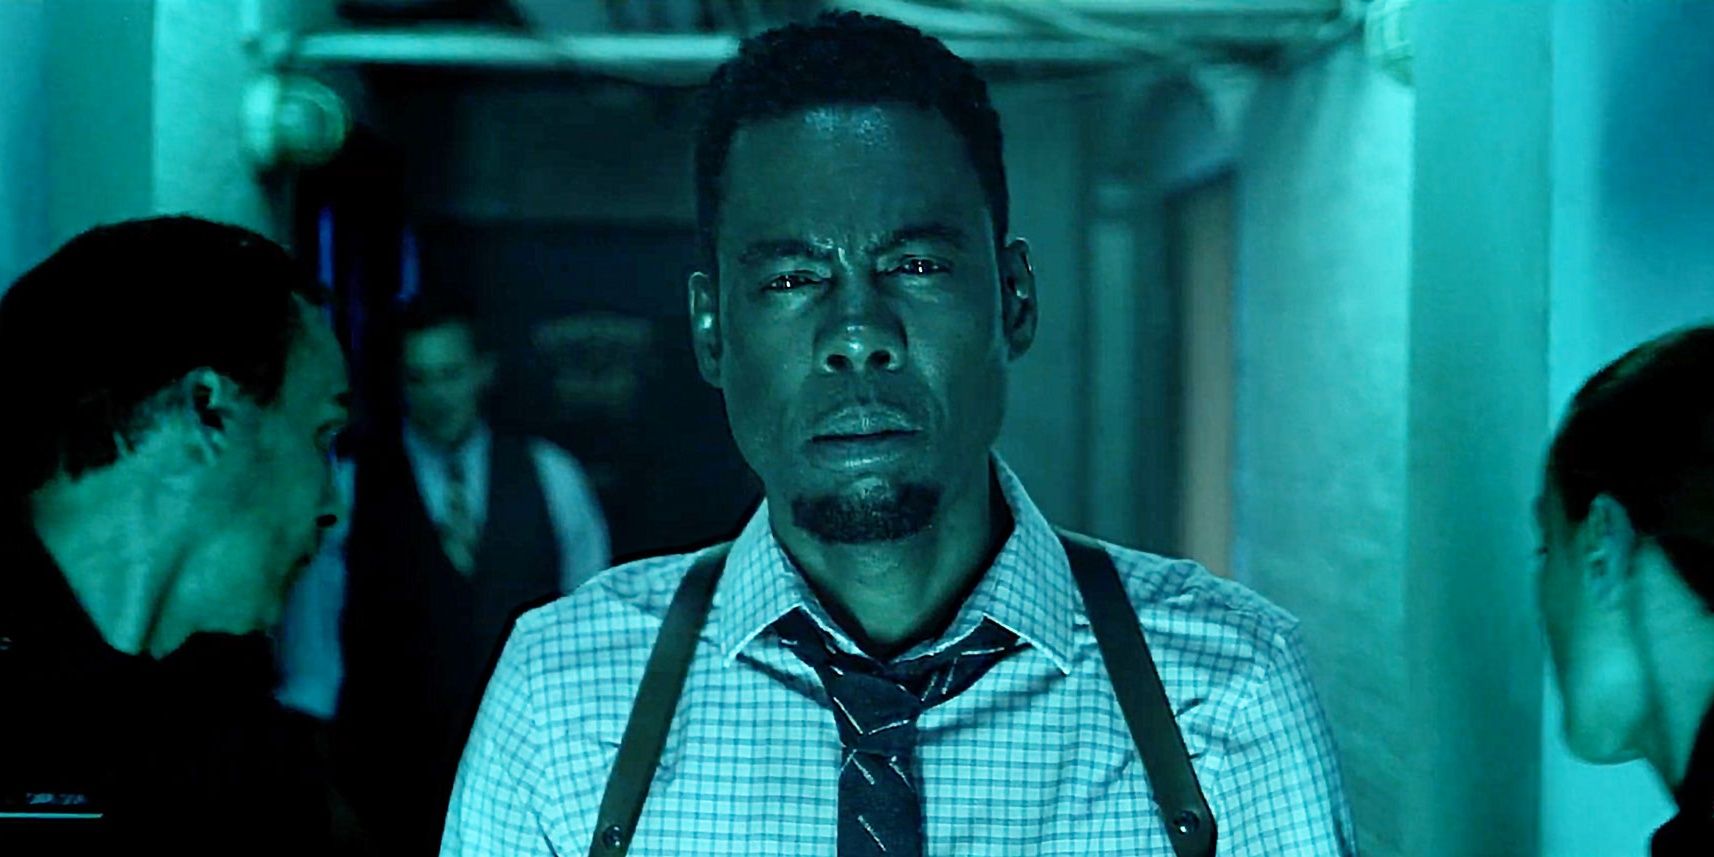 Chris Rock as Zeke looking concerned in Spiral: From the Book of Saw